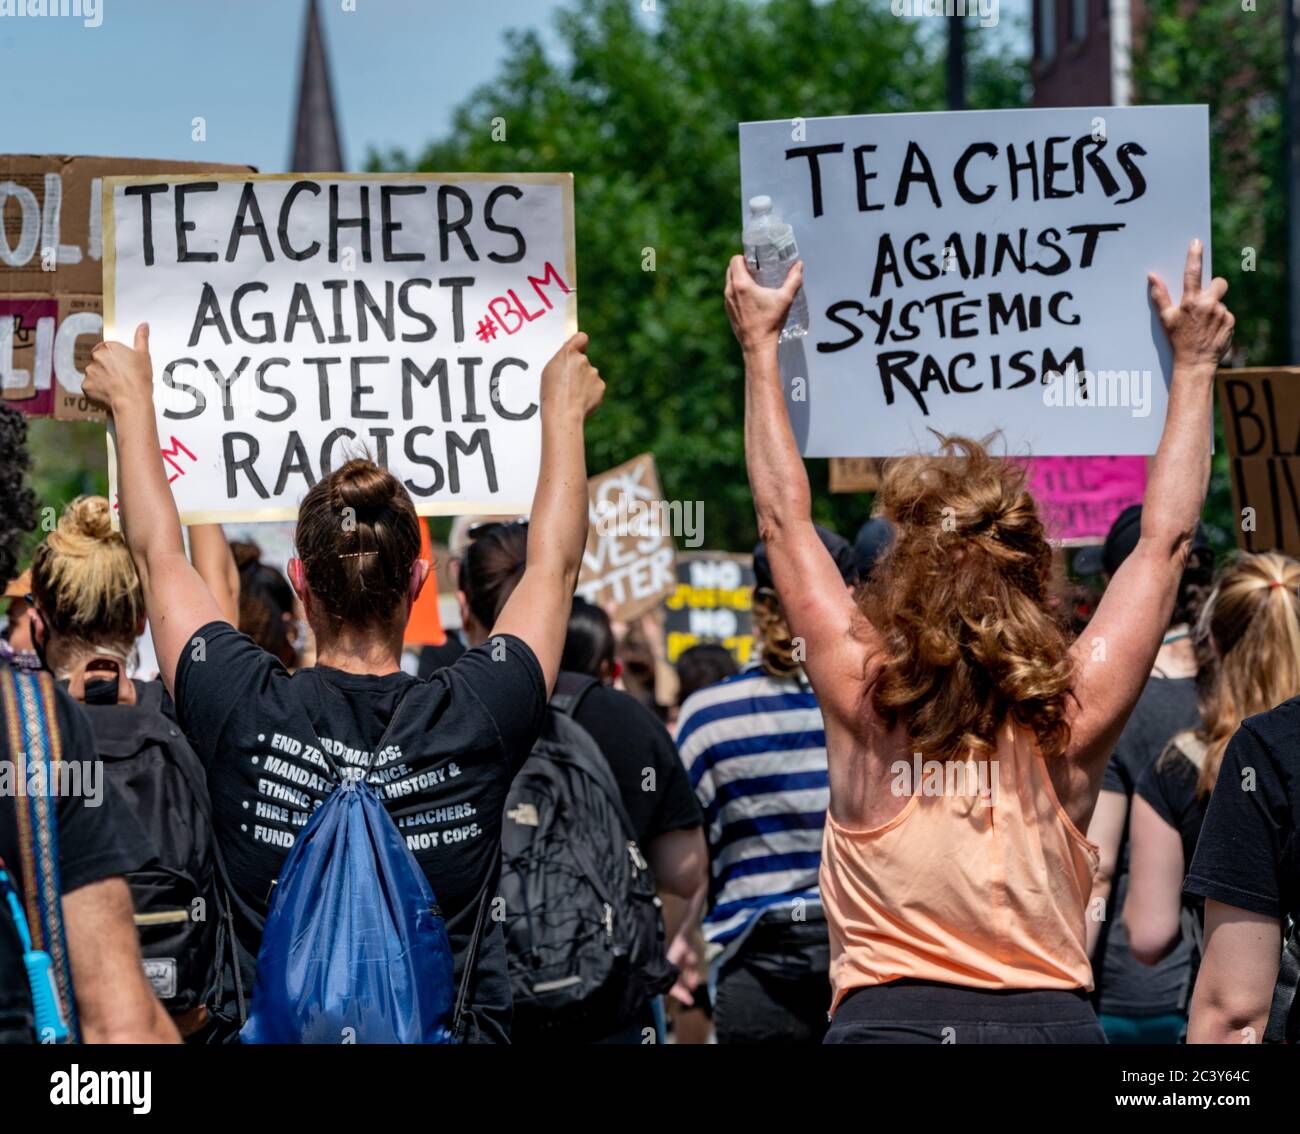 June 22, 2020, Boston, Massachusetts, USA: Protesters rally holding signs 'Teachers against systemic racism' during a Black Lives Matter rally in a response to a death of Rayshard Brooks and against police brutality and racism in Boston. Credit: Keiko Hiromi/AFLO/Alamy Live News Stock Photo